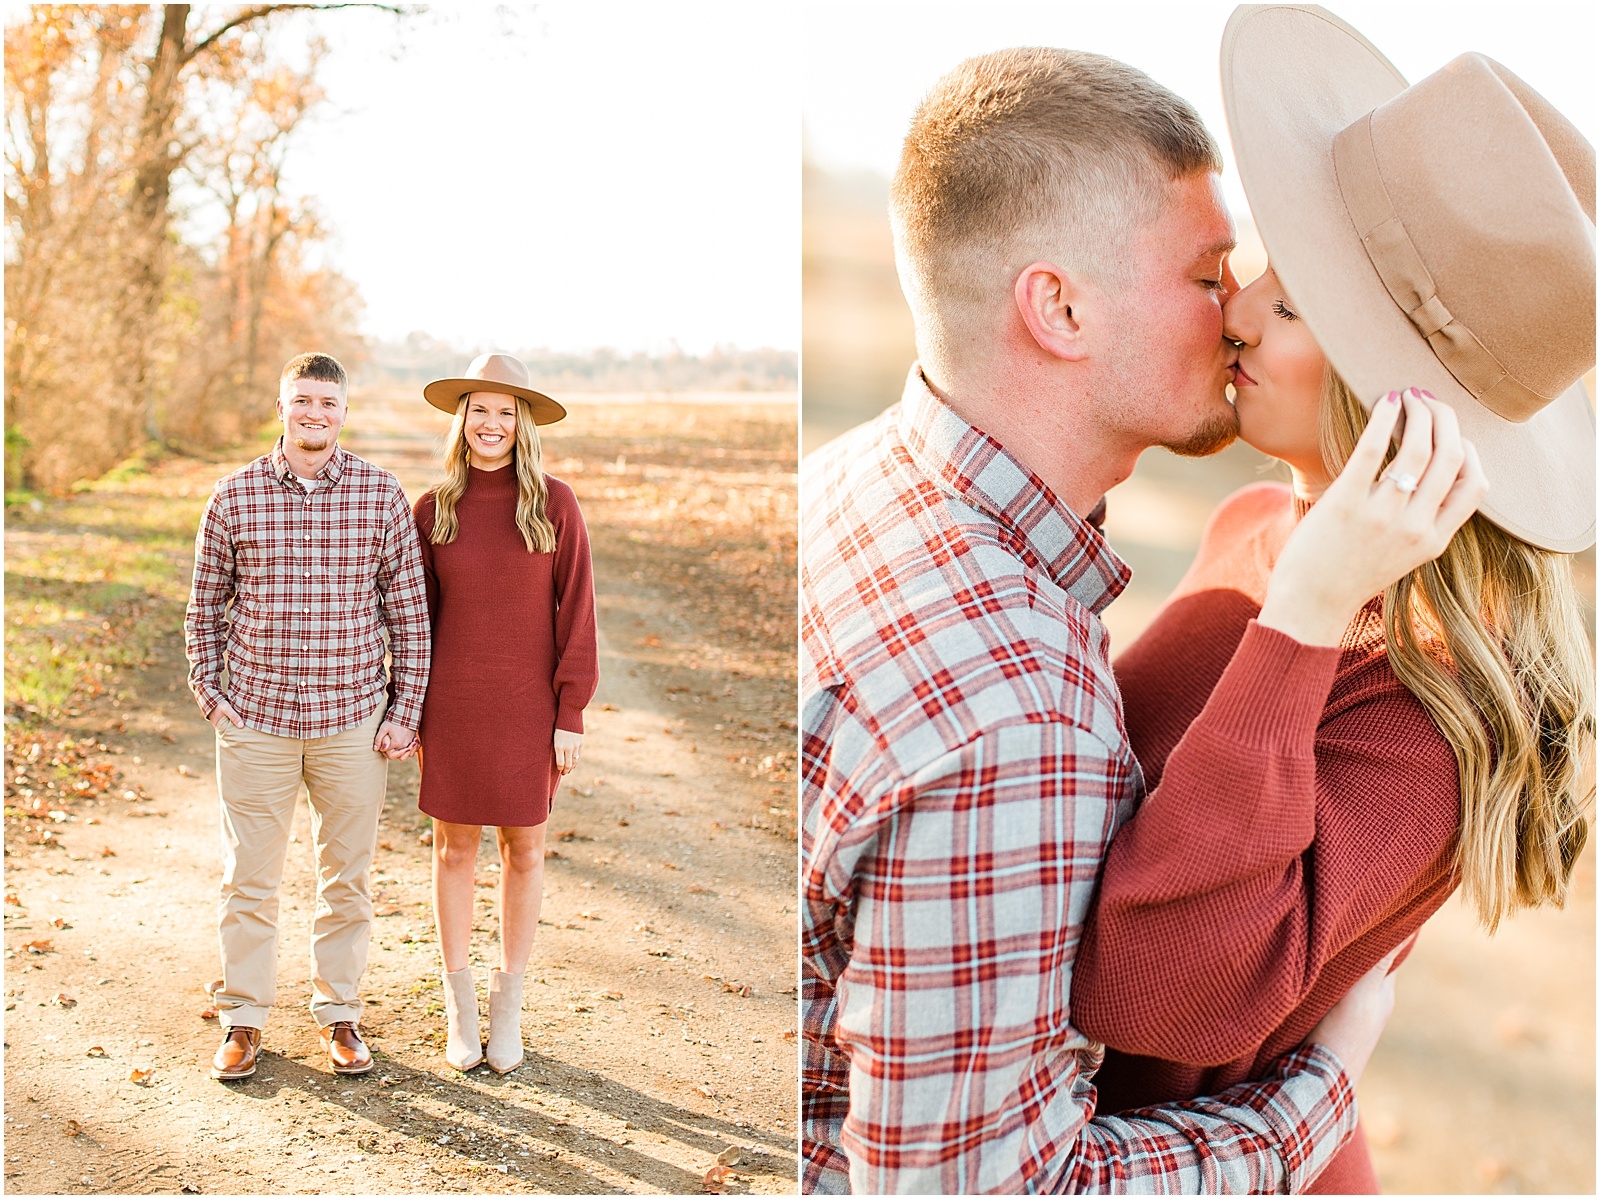 A Fall Southern Indiana Engagement Seesion | Cody and Hannah | Bret and Brandie Photography 002.jpg